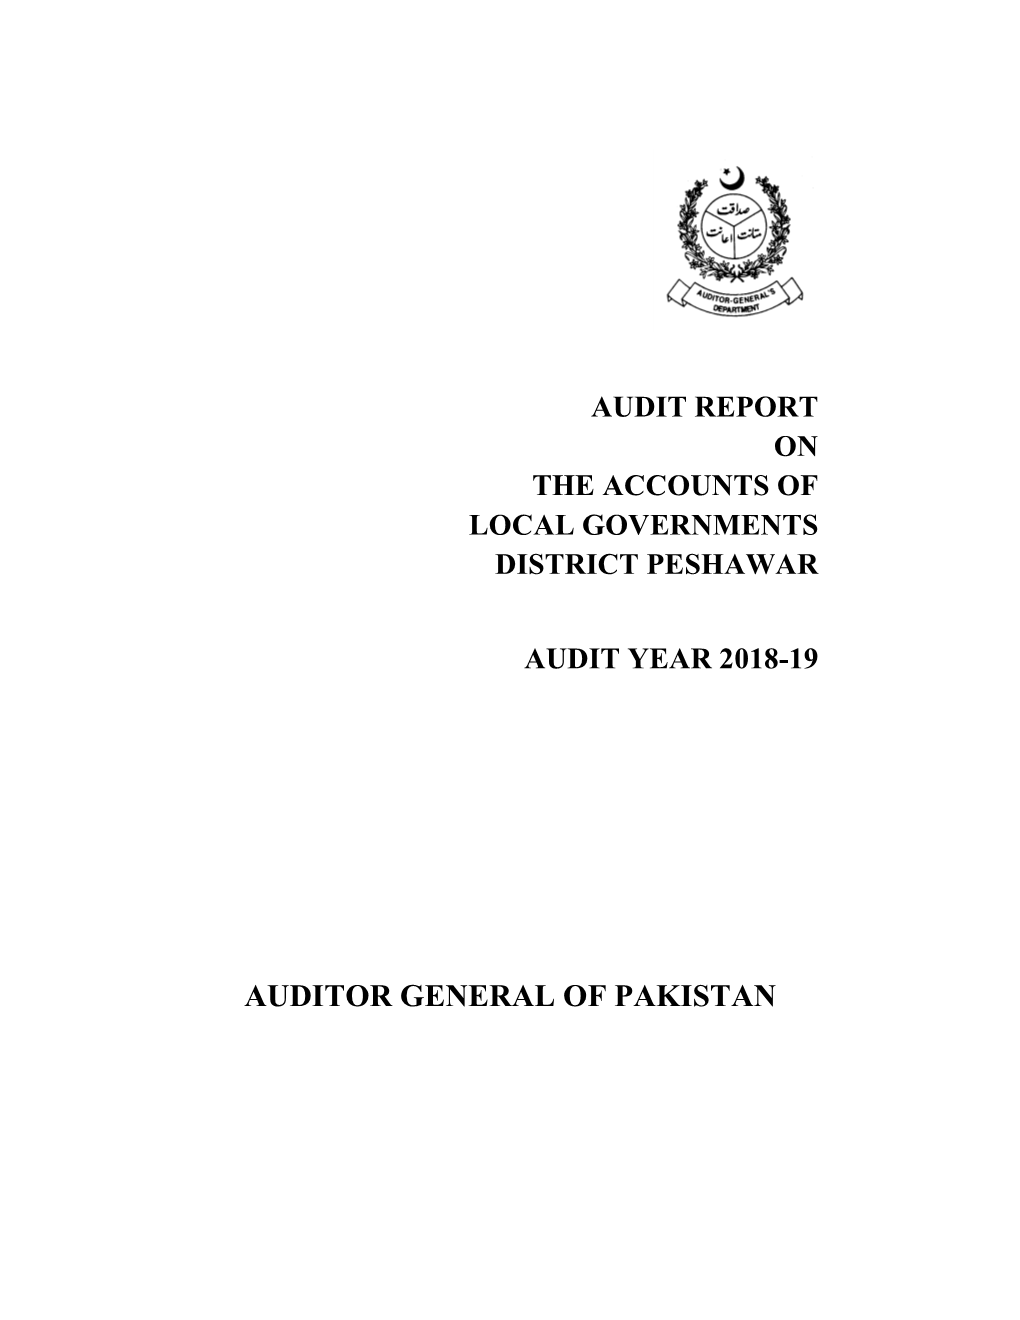 Audit Report on the Accounts of Local Governments District Peshawar